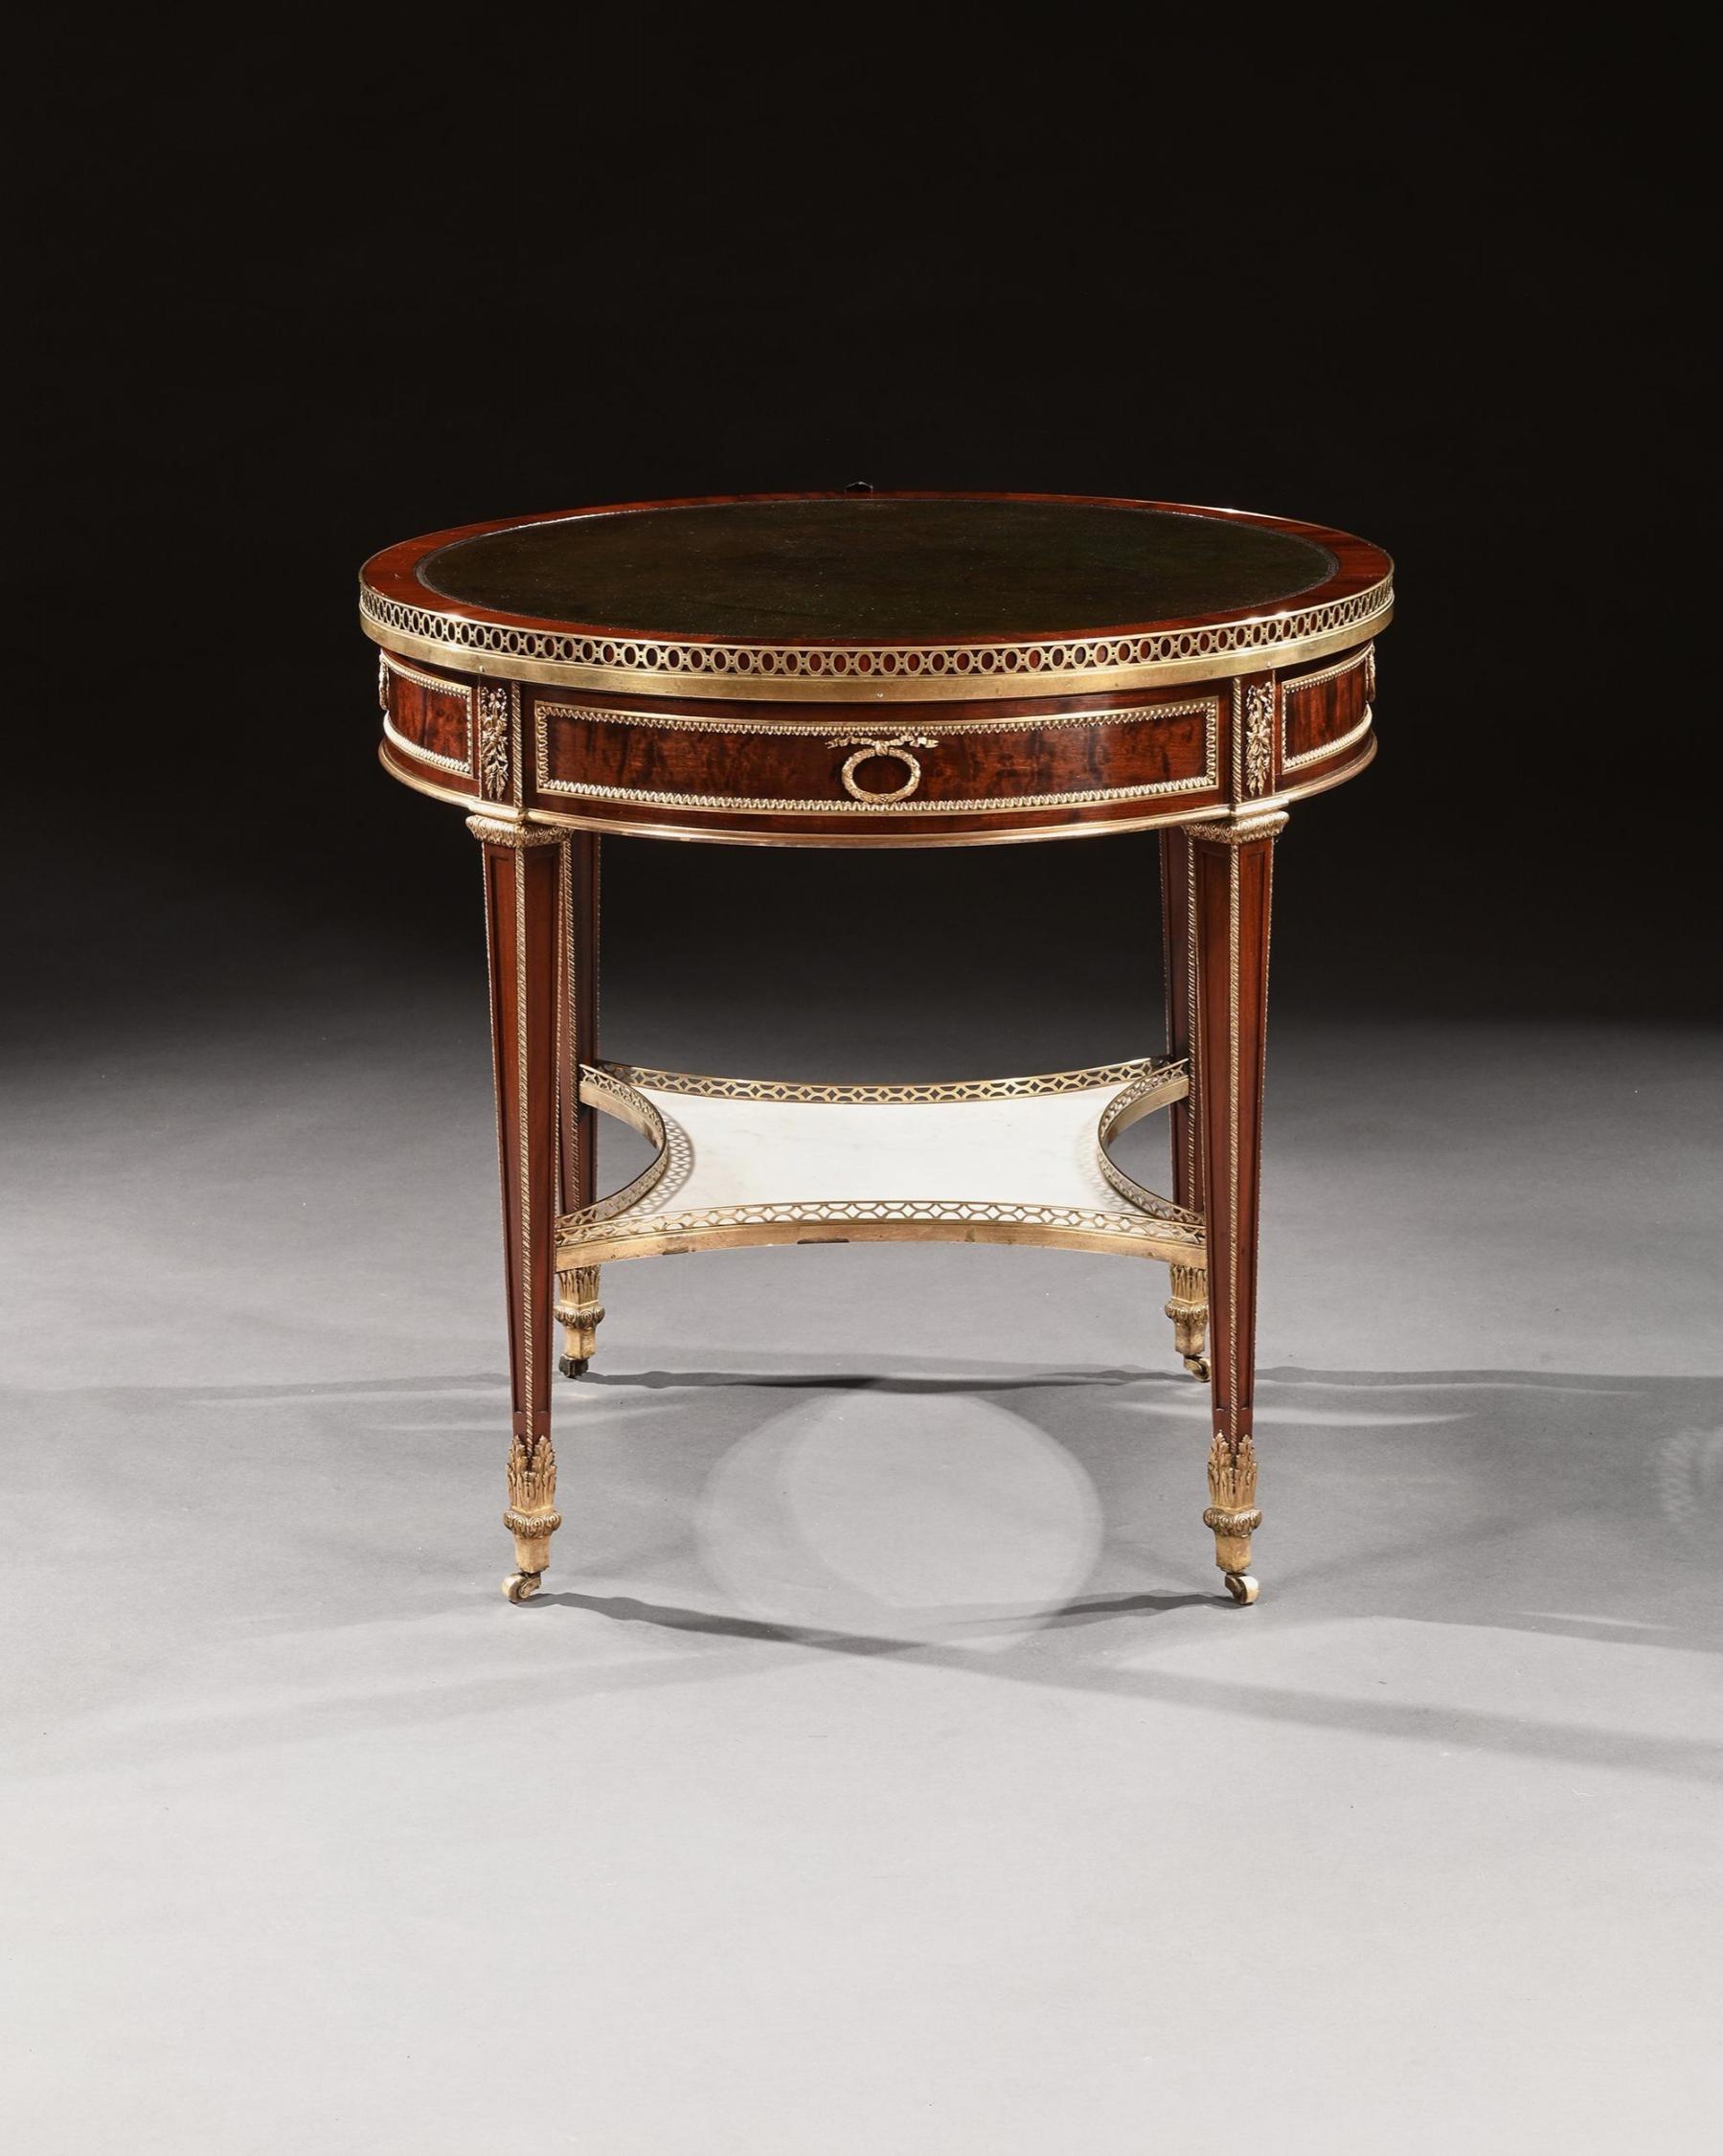 19th Century Exceptional G. Durand 19th C. Mahogany & Gilt Bronze Gueridon Bouillotte Table